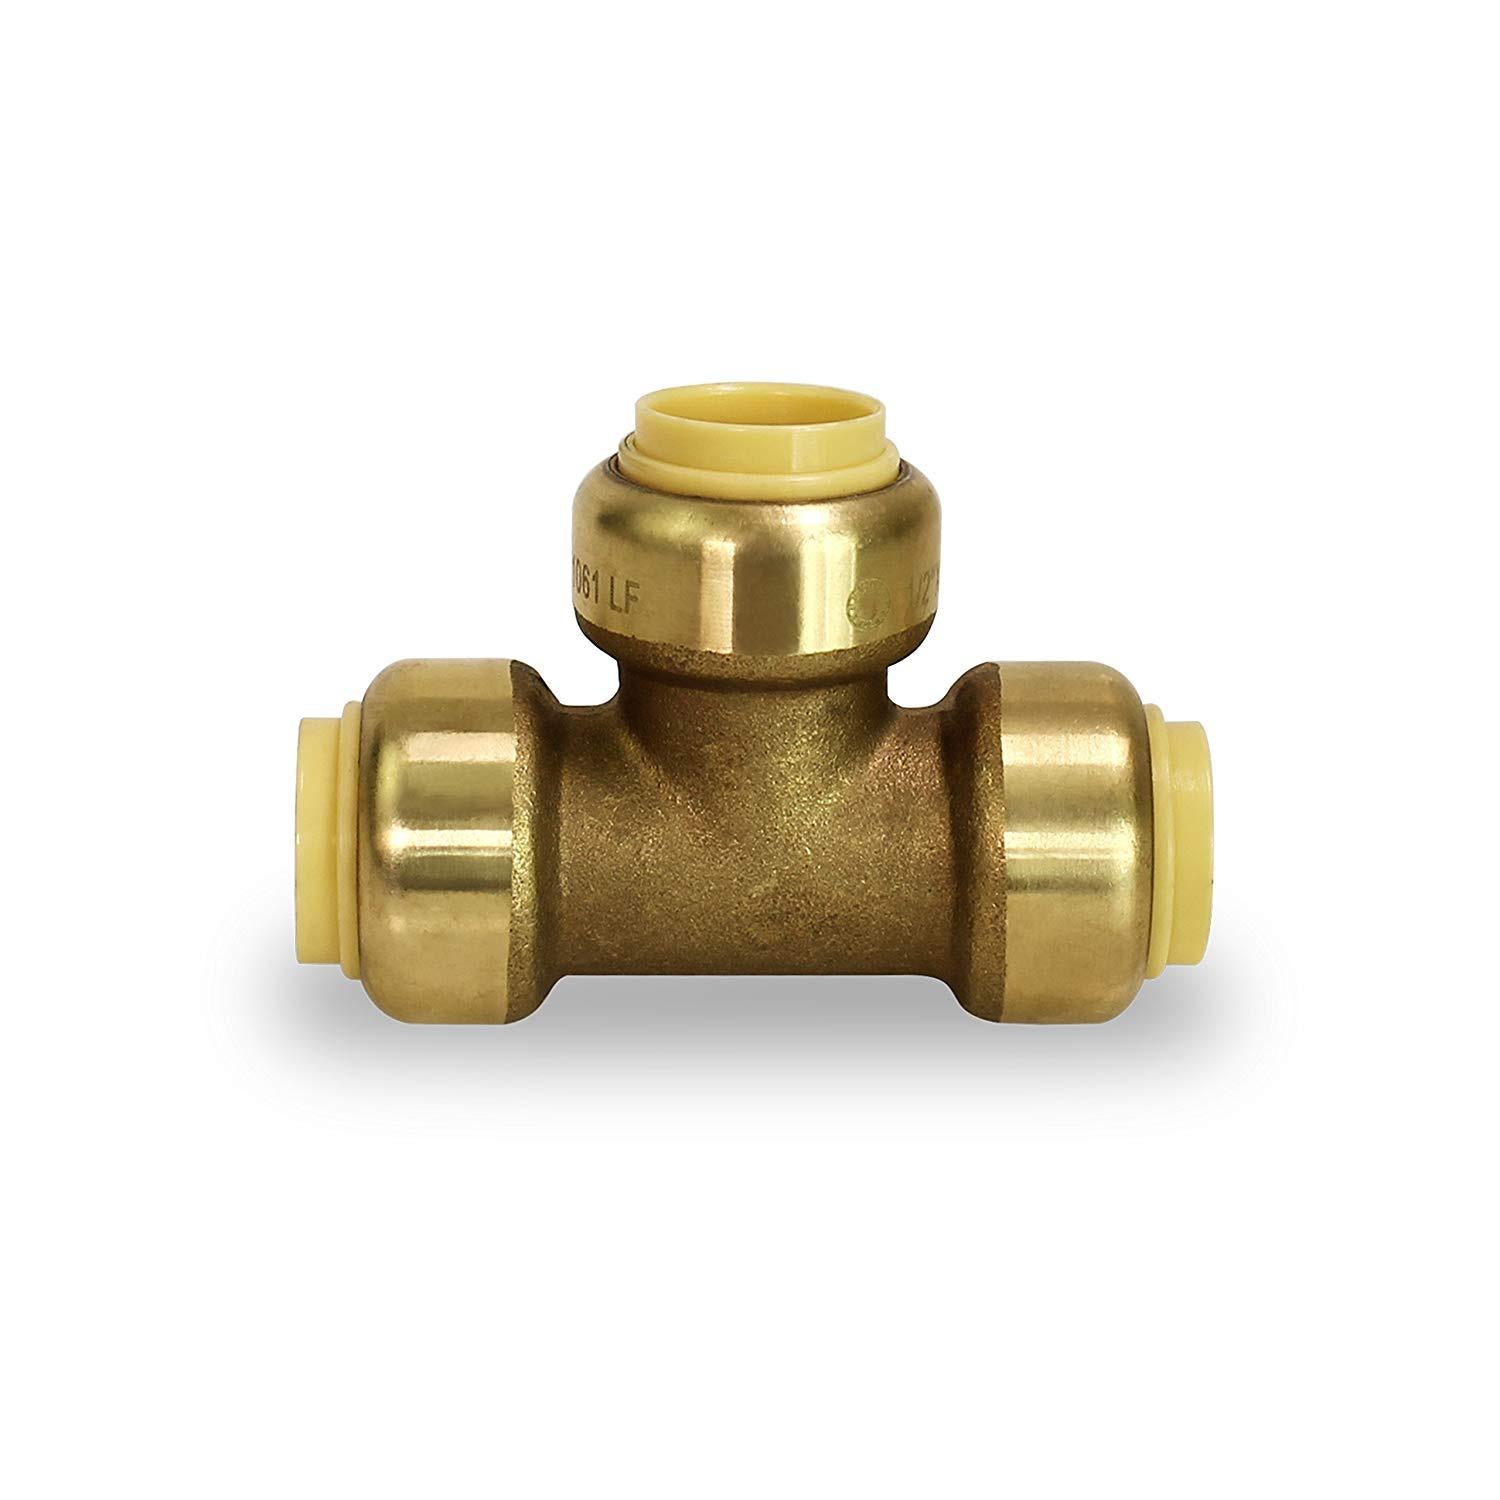 1/2-Inch Push Plumbing Tee,Push-to-Connect Pex Fittings